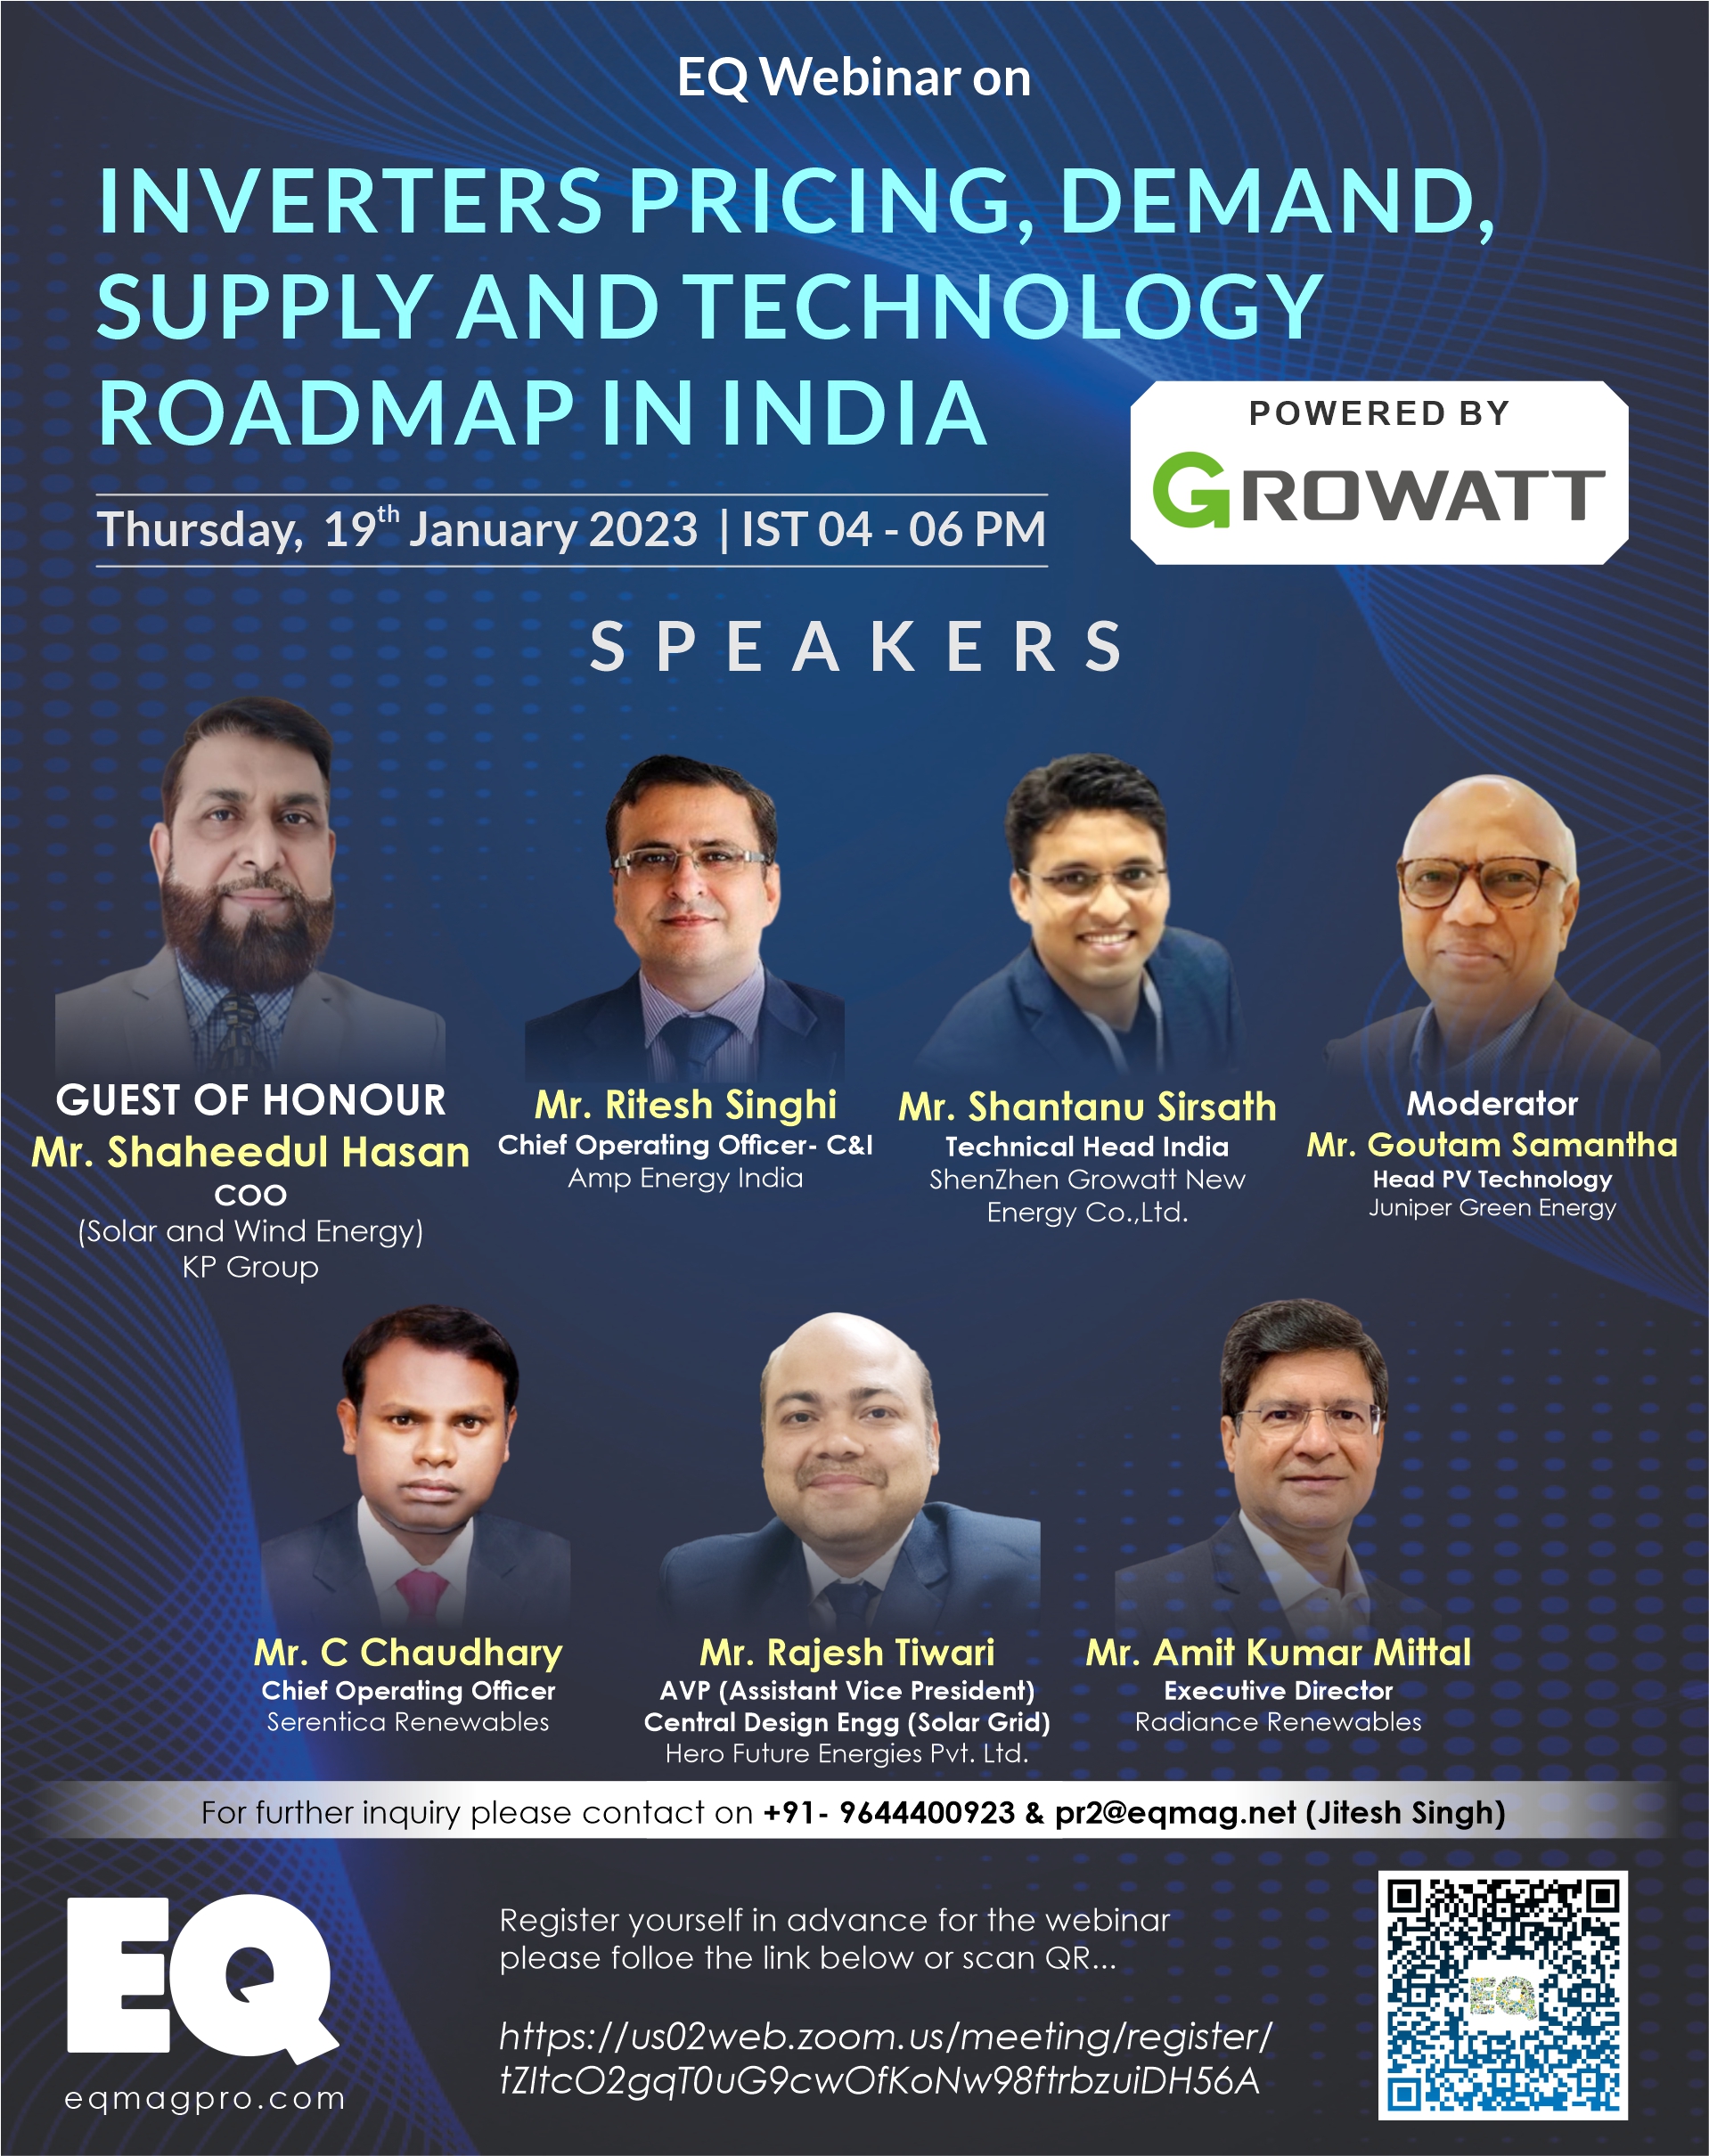 EQ Webinar on Inverters Pricing, Demand, Supply & Tech RoadMap in India Powered by GROWATT 19th January 2022 (Thursday) 4:00 PM Onwards….Register Now!